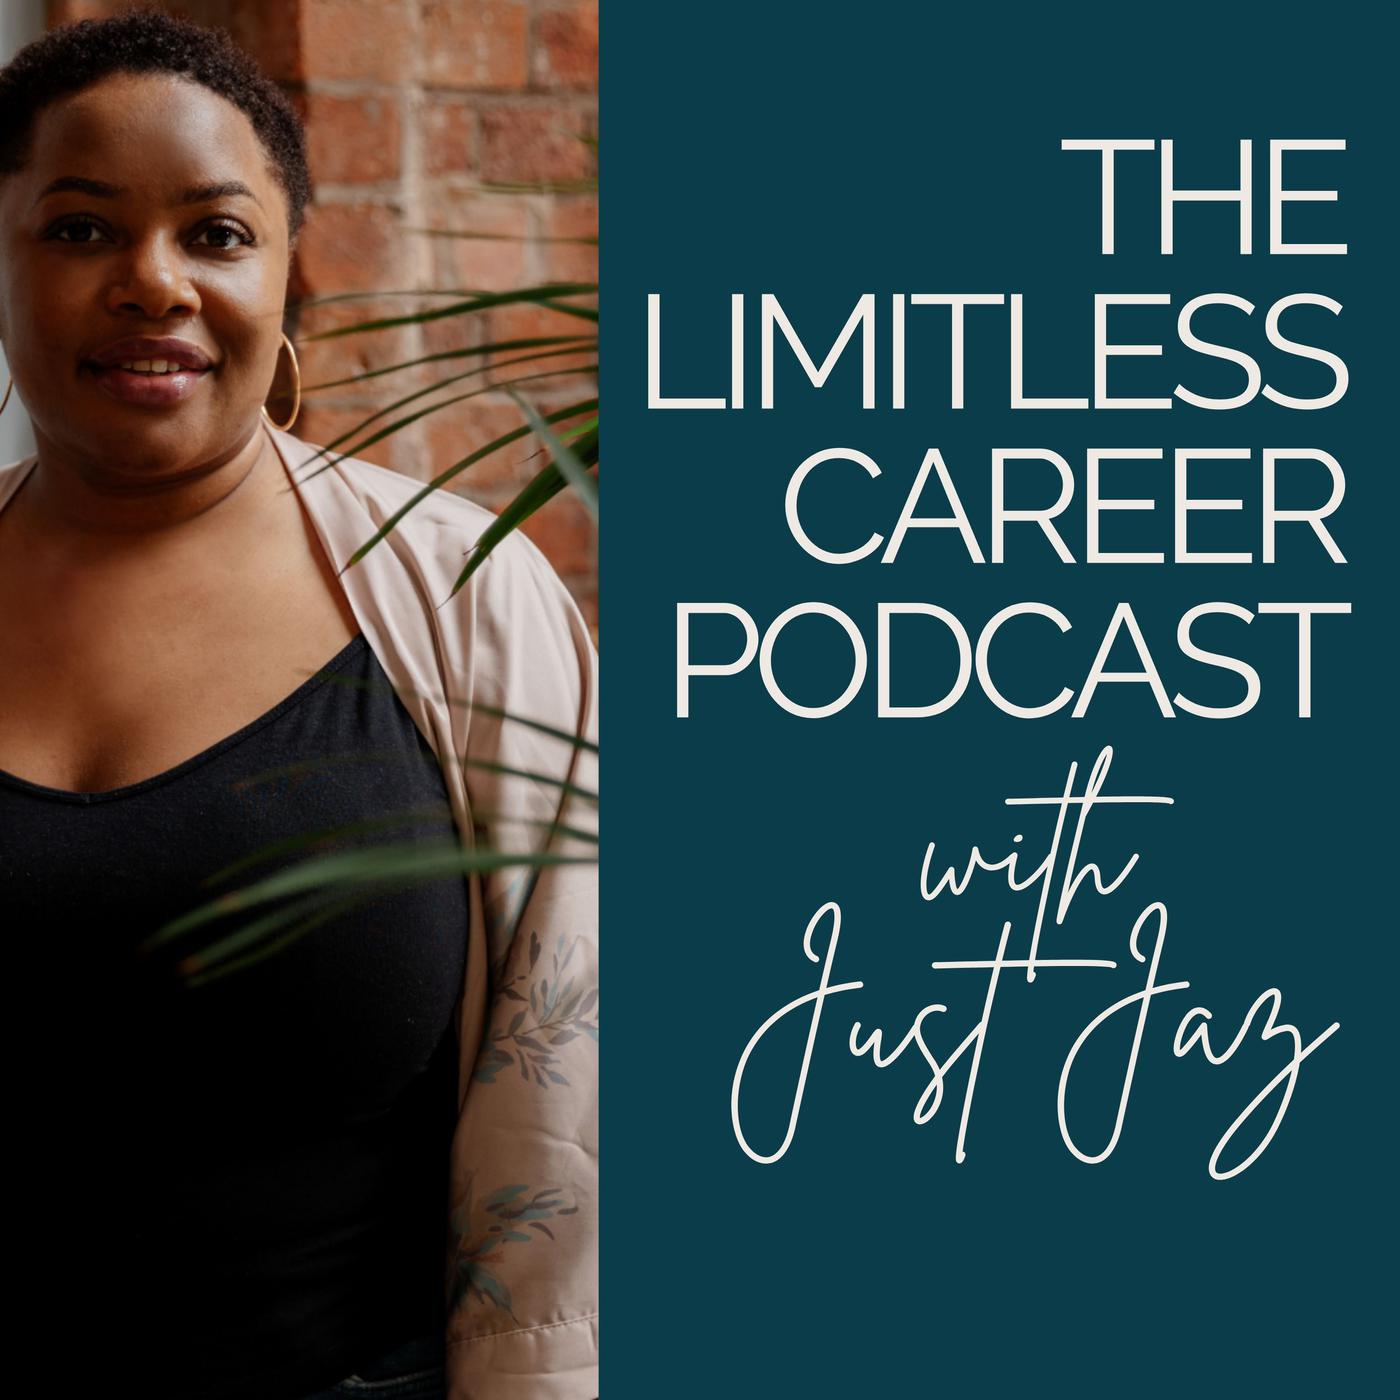 The Limitless Career Podcast